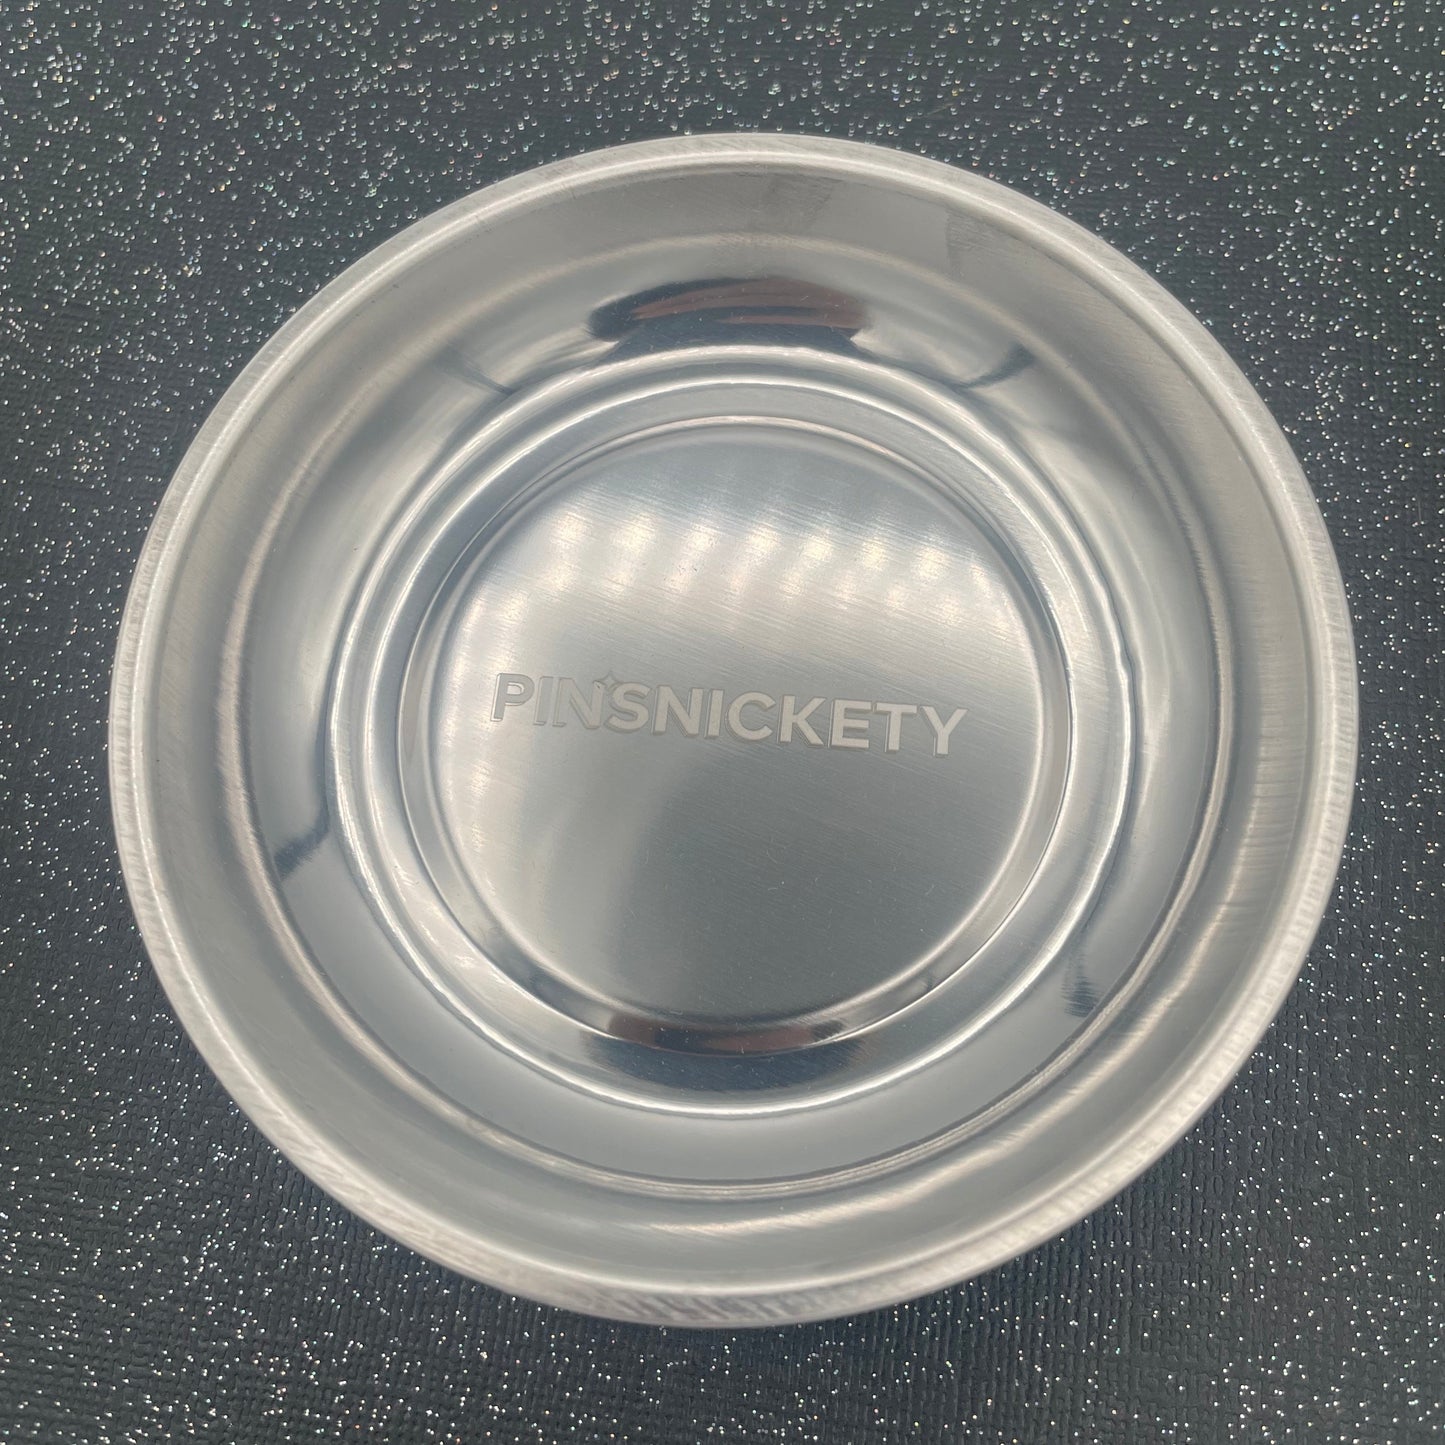 pinsnickety magnetic pin storage bowl